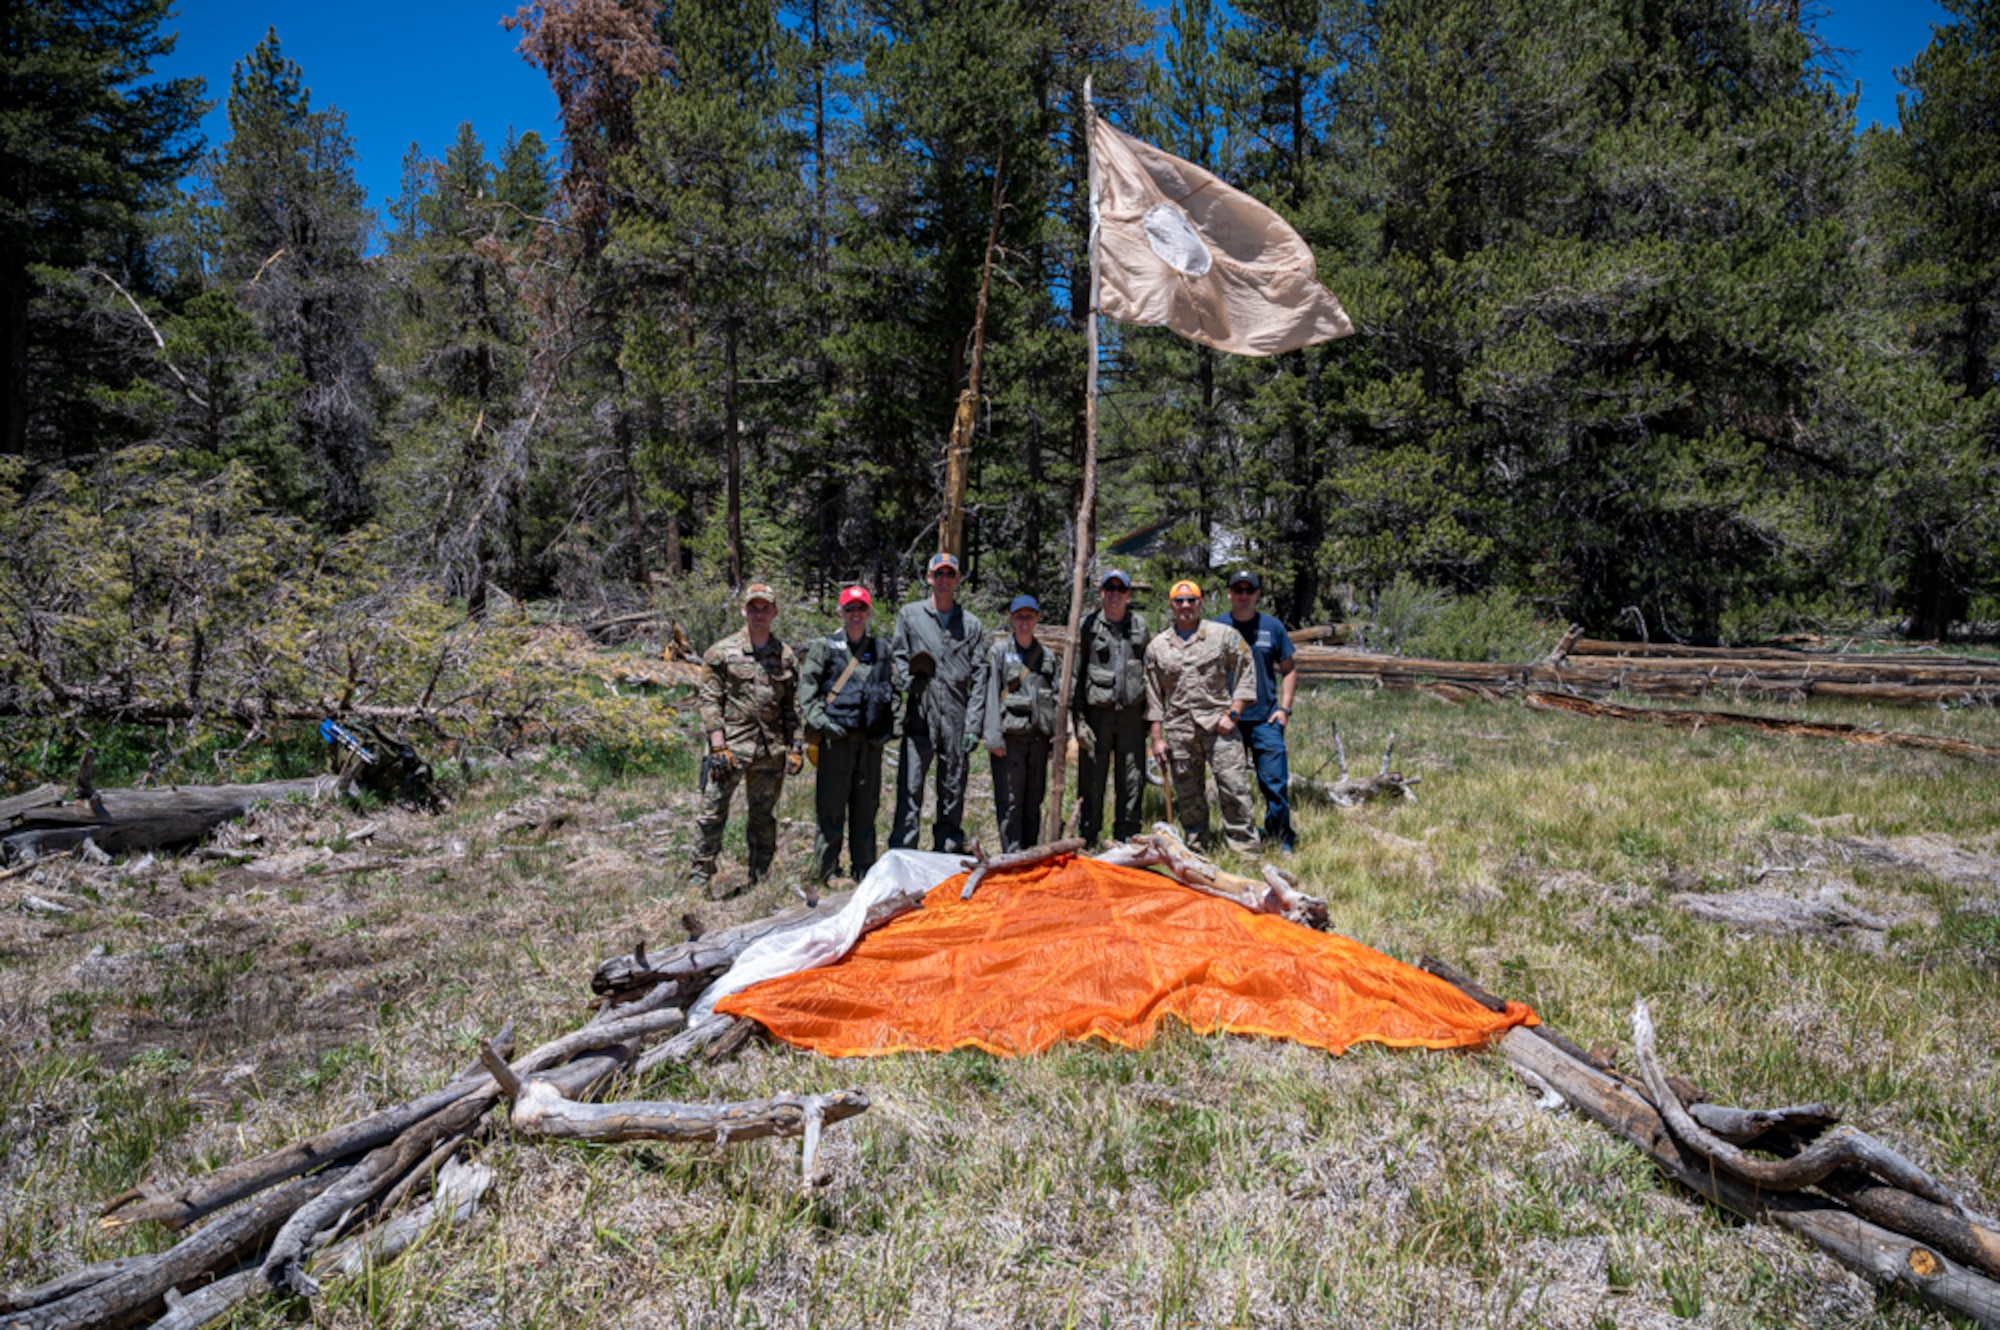 Edwards Air Force Base aircrew must pass Initial Survival Training with the SERE Training Unit (Survival, Evasion, Resistance and Escape). We take you to the California Sierras to follow our Airmen doing whatever it takes to survive in the wilderness in case of a flight emergency.